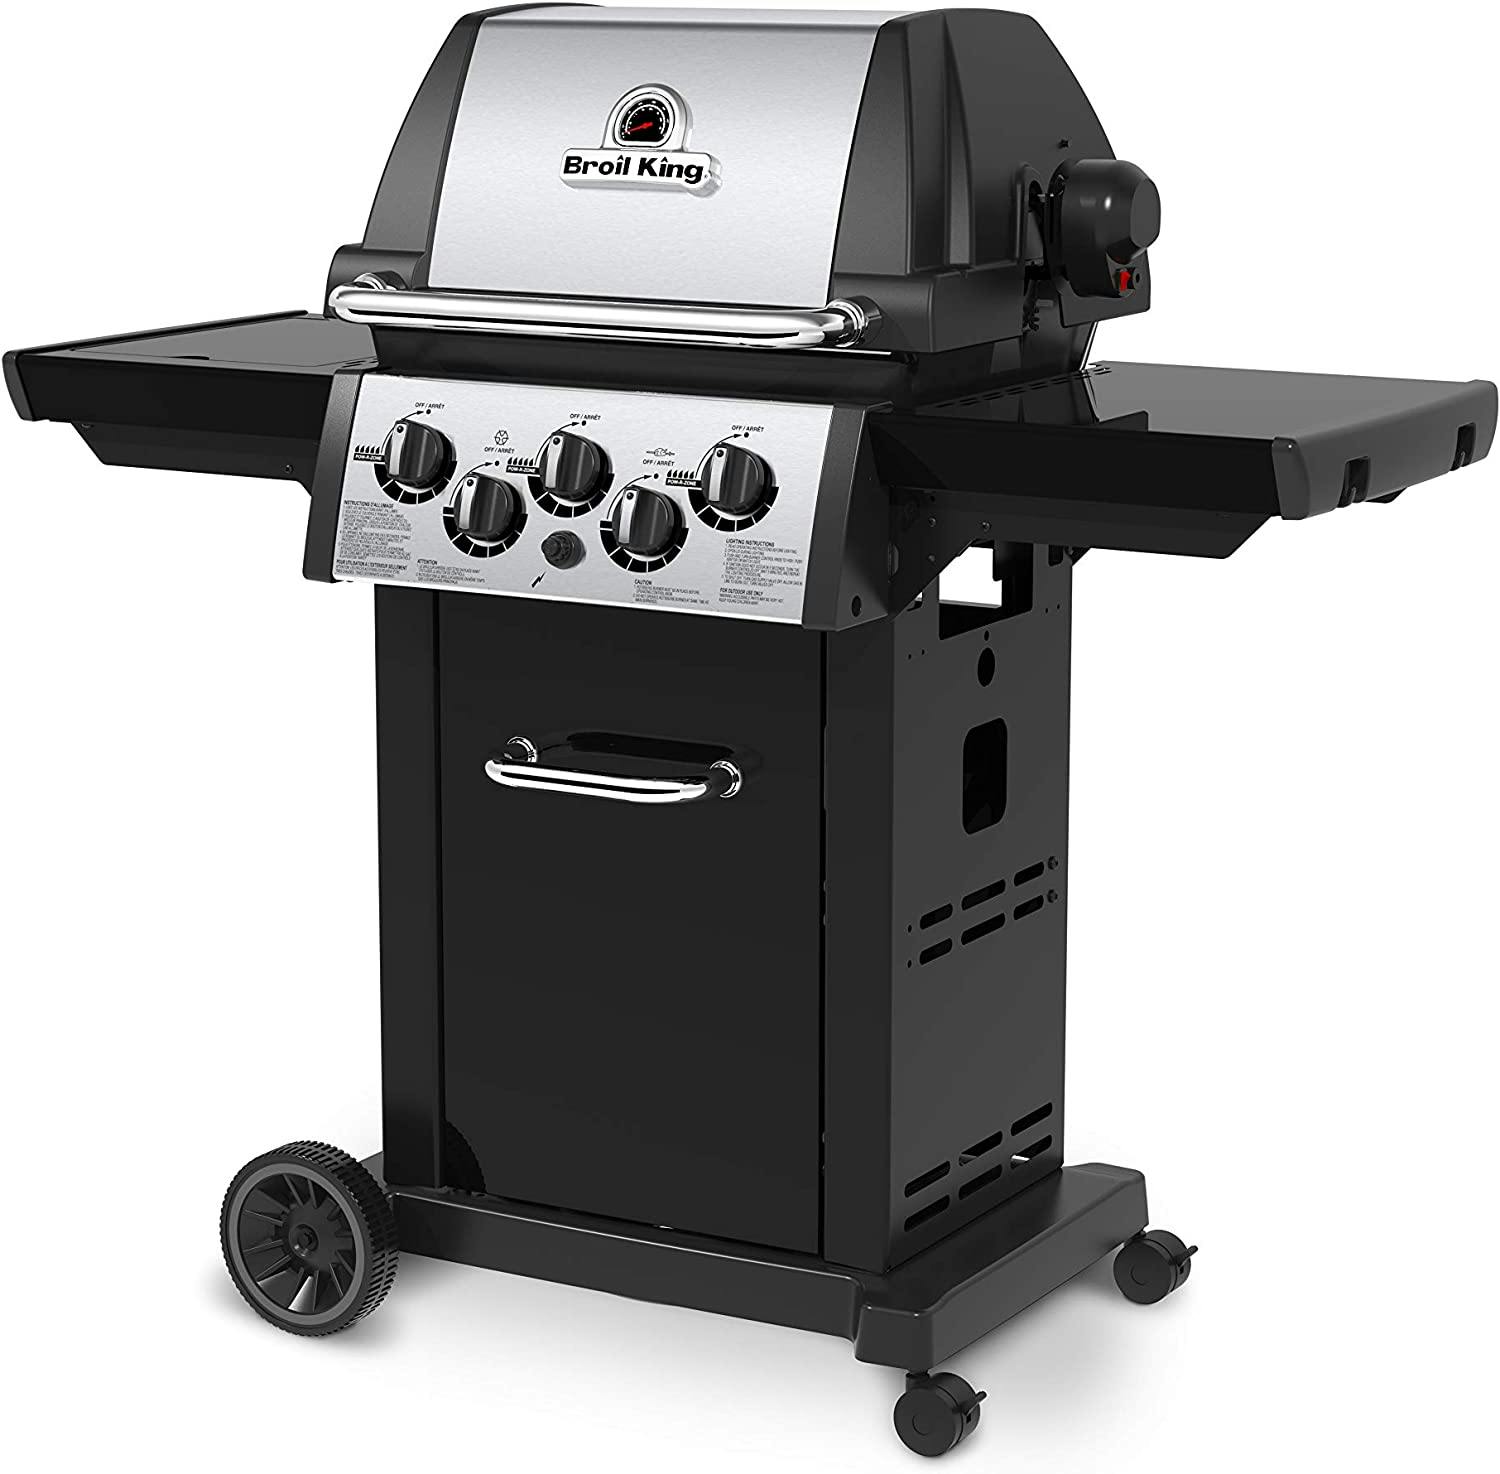 Broil King Monarch Gas Grill